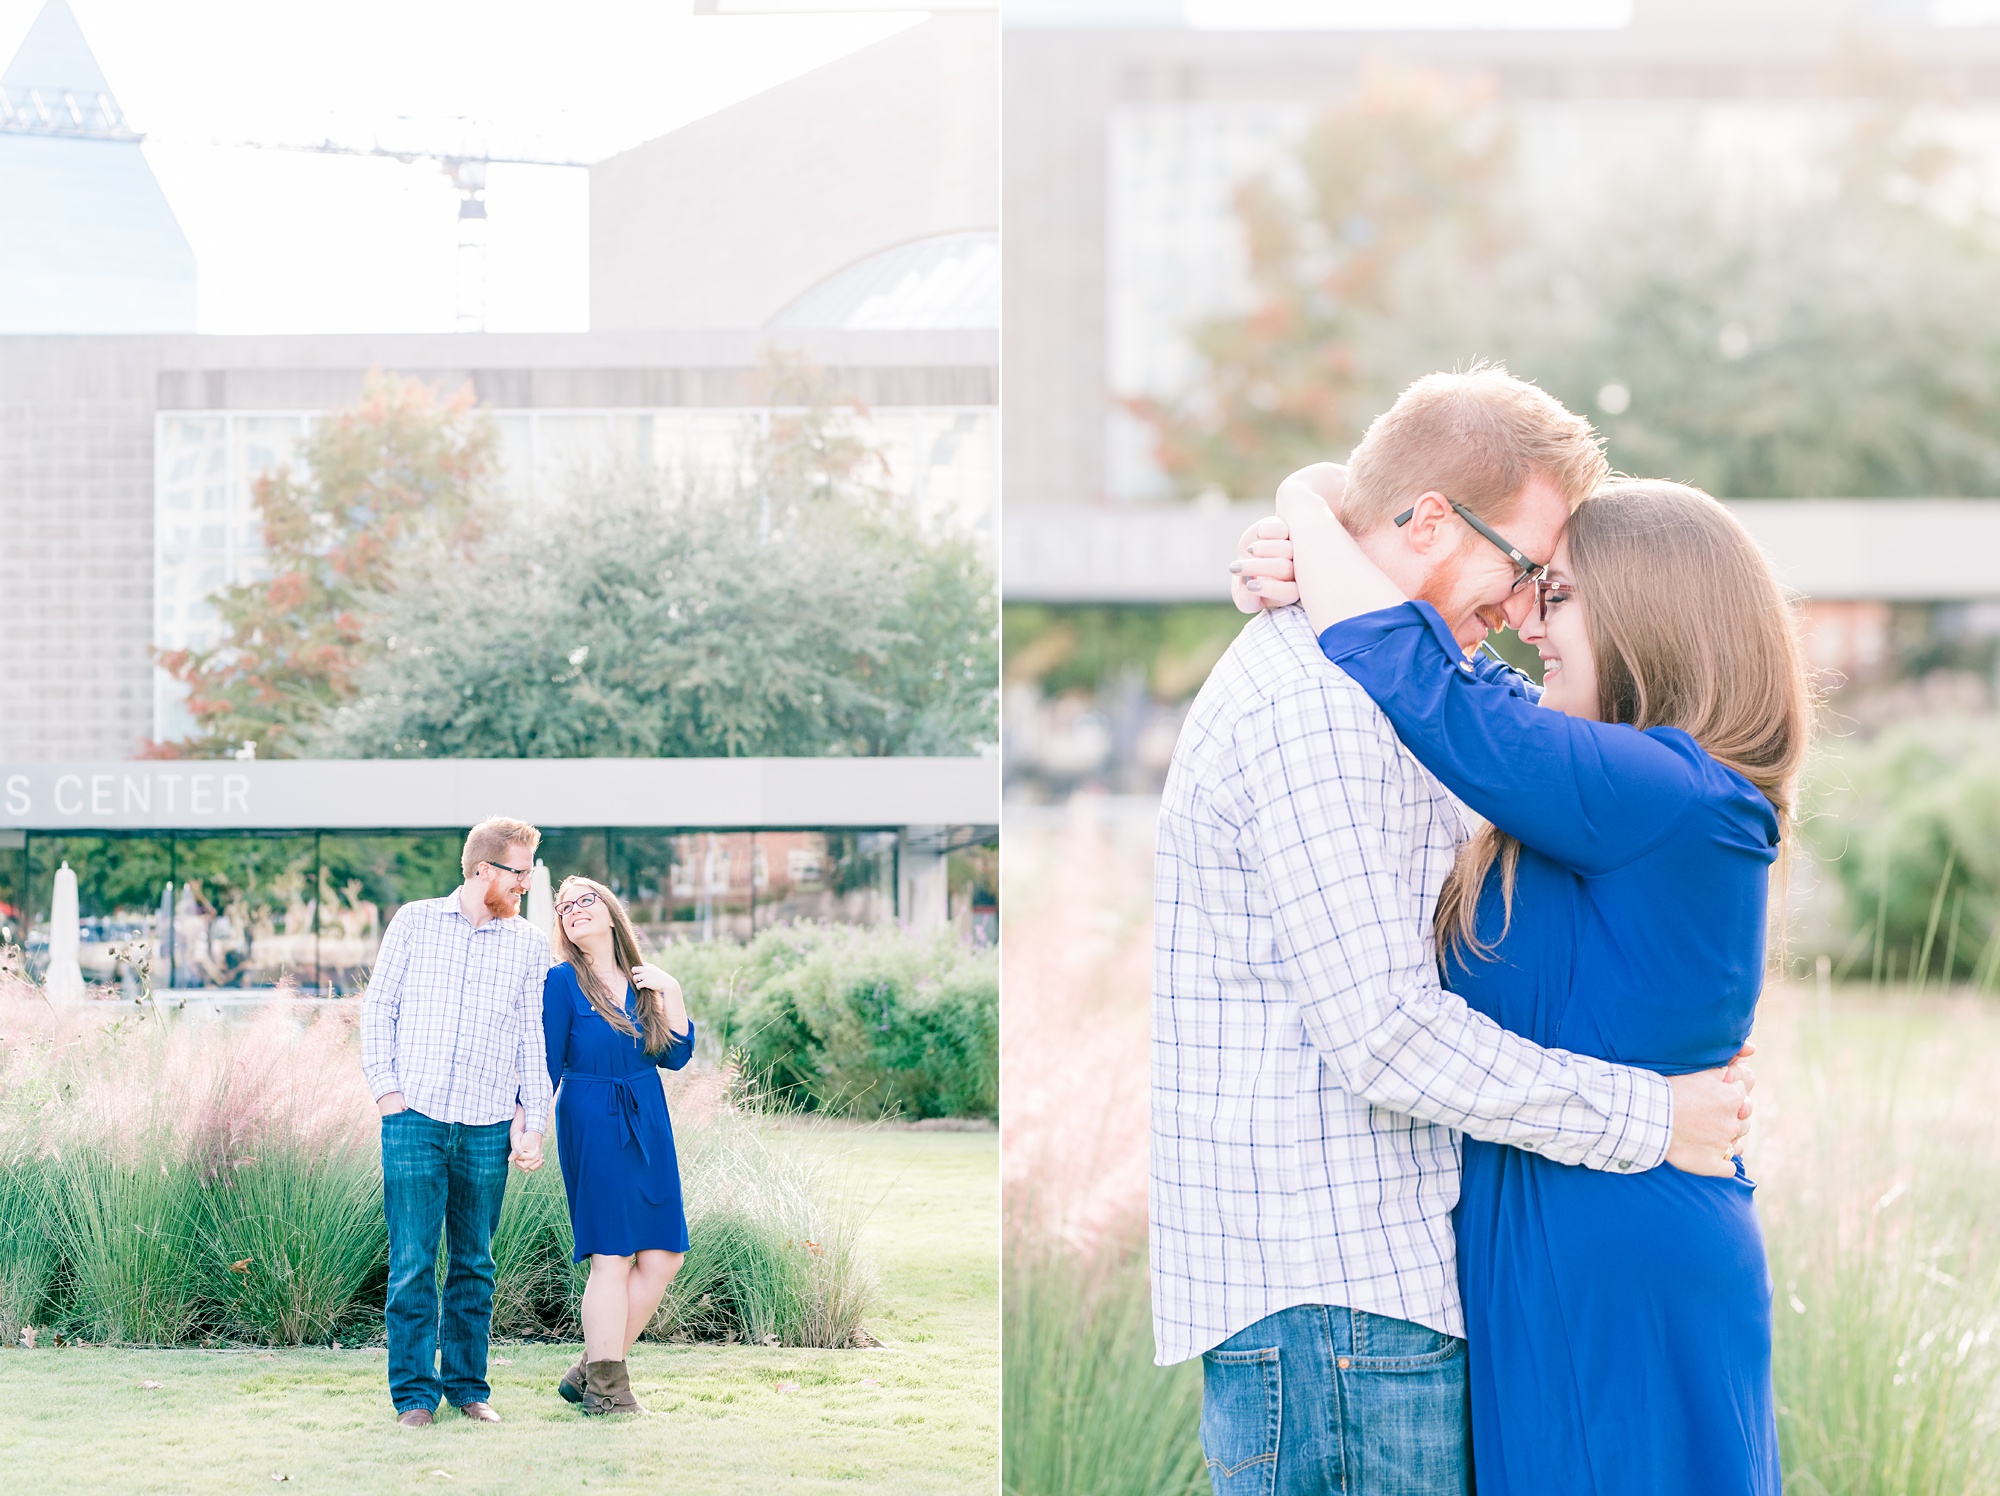 Winspear Opera House Engagement Session in Dallas